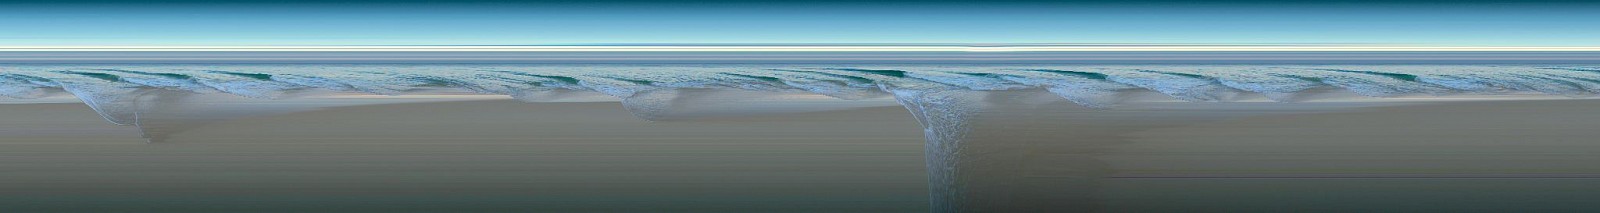 Jay Mark Johnson, SEAL ROCK WAVES #23, 2012 Australia
archival pigment on paper, mounted on aluminum, 40 x 300 in. (101.6 x 762 cm)